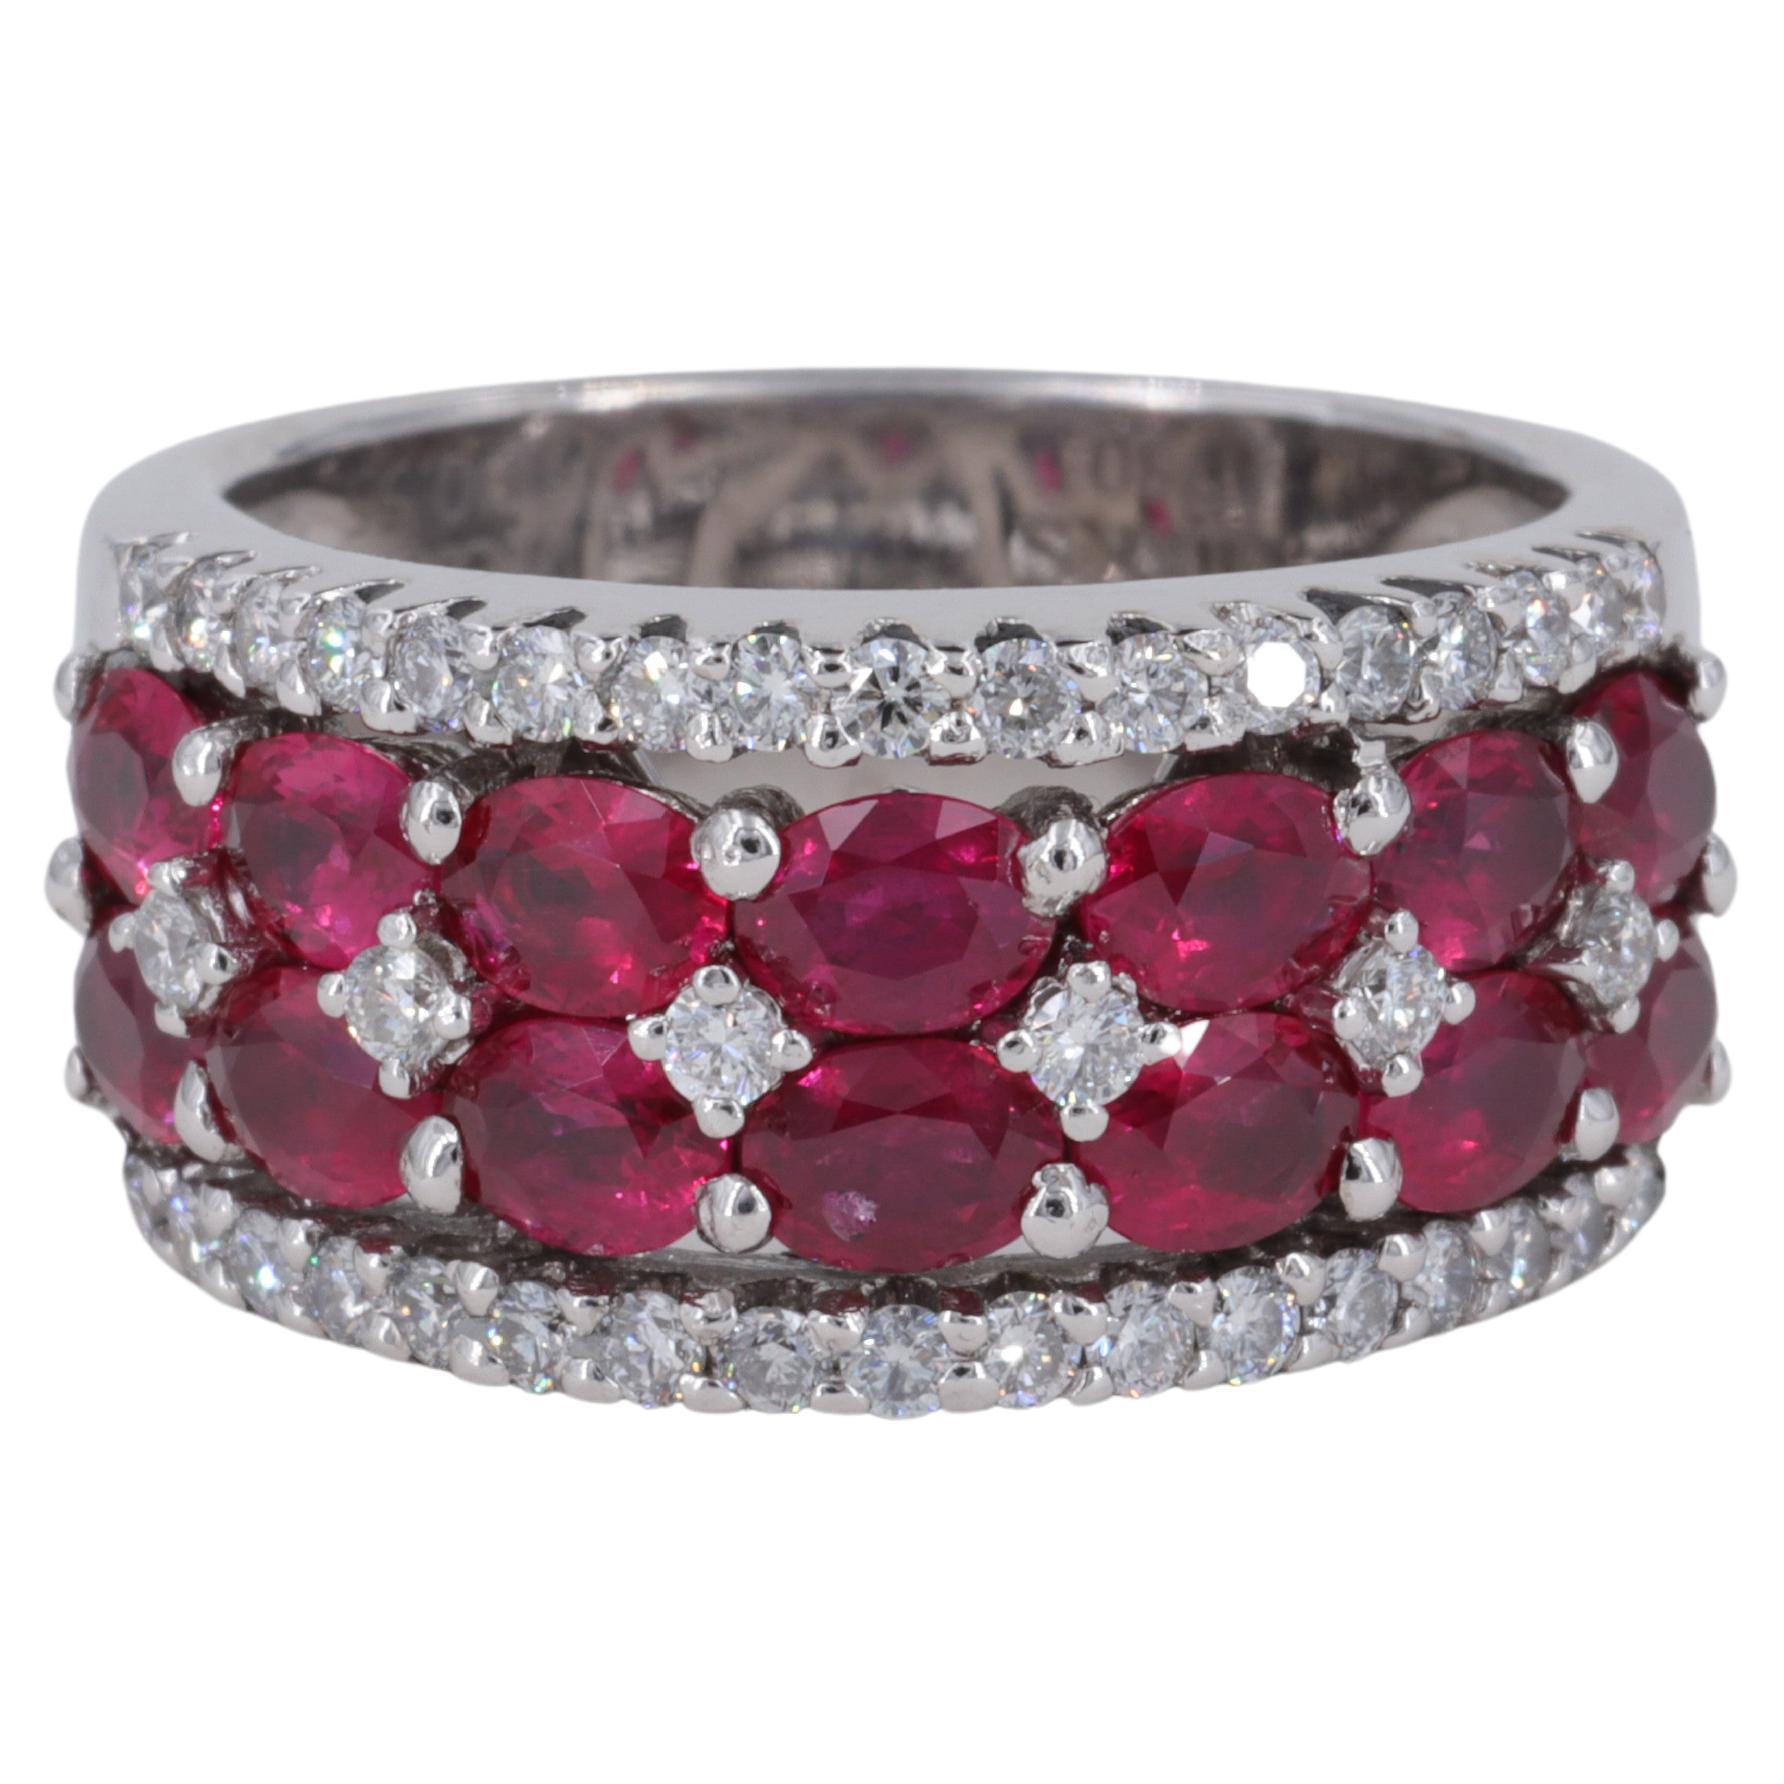 Birks Oval Shaped Natural Ruby and Diamond Wide Band Ring in 18 Karat White Gold For Sale